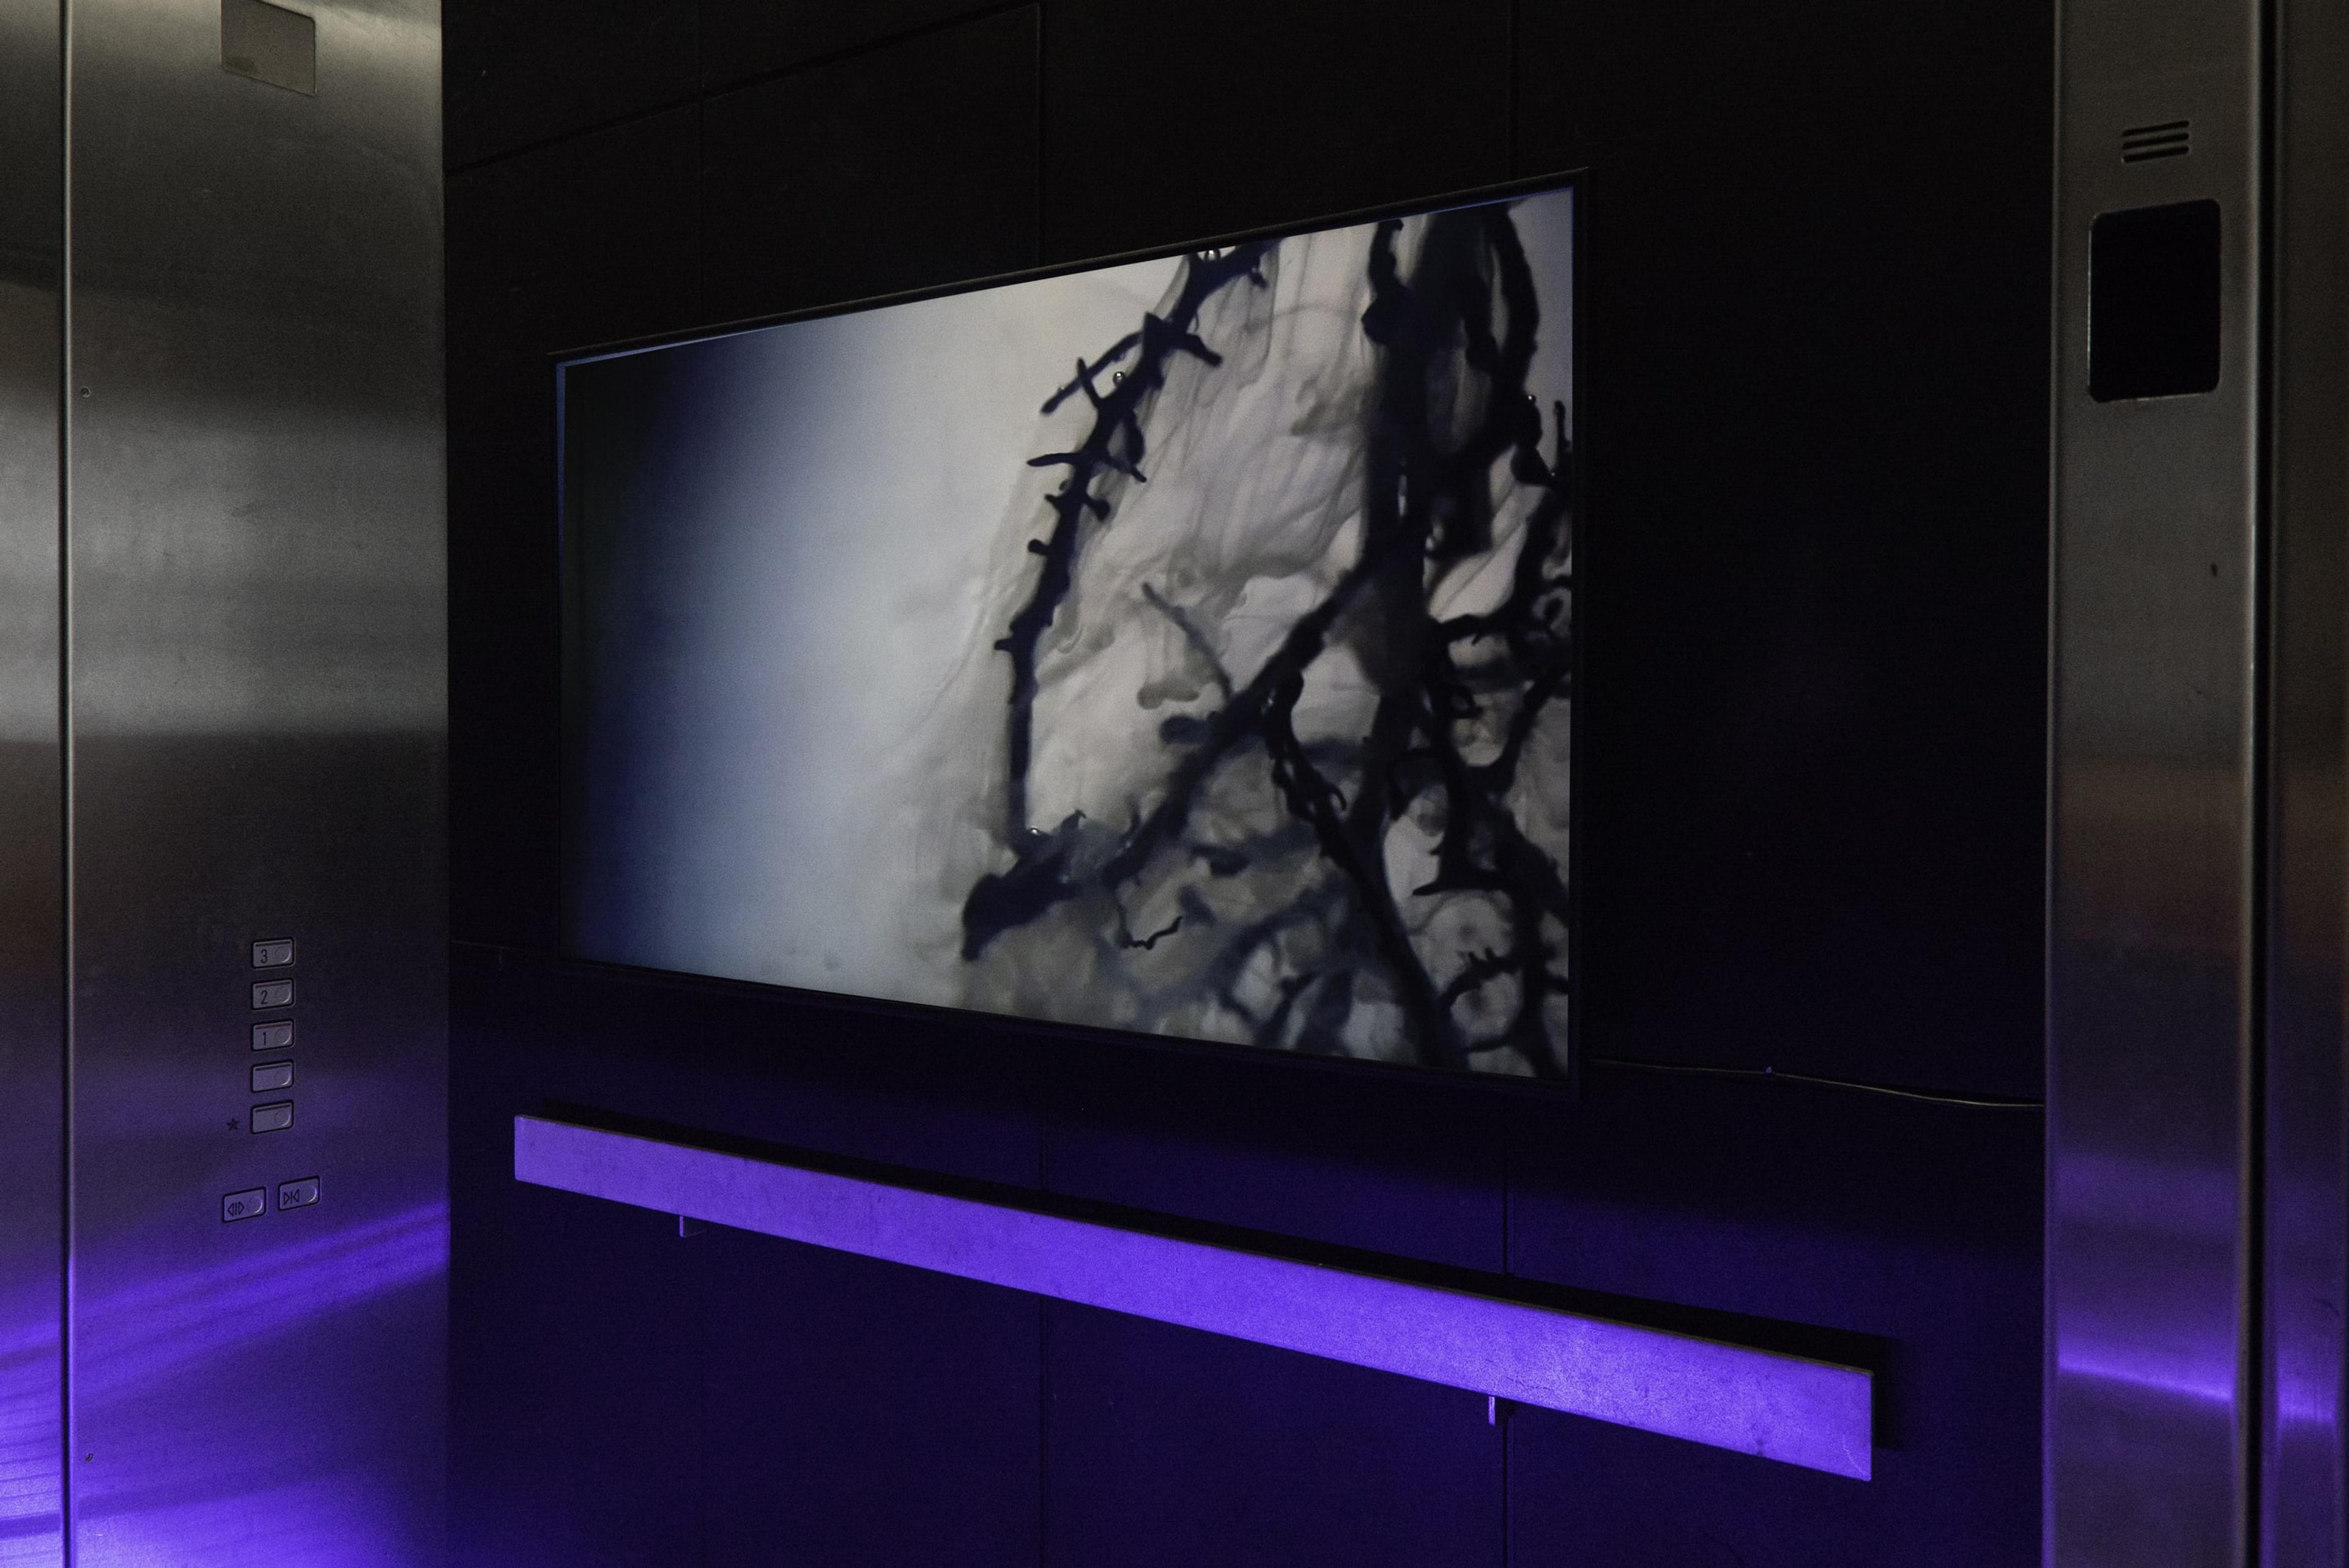 Joyce Campbell, Flight Dream, 2014, single channel digital video installation, colour, sound by Peter Kolovos and narration by Andrew Maxwell from a story by Mark von Schlegell. 